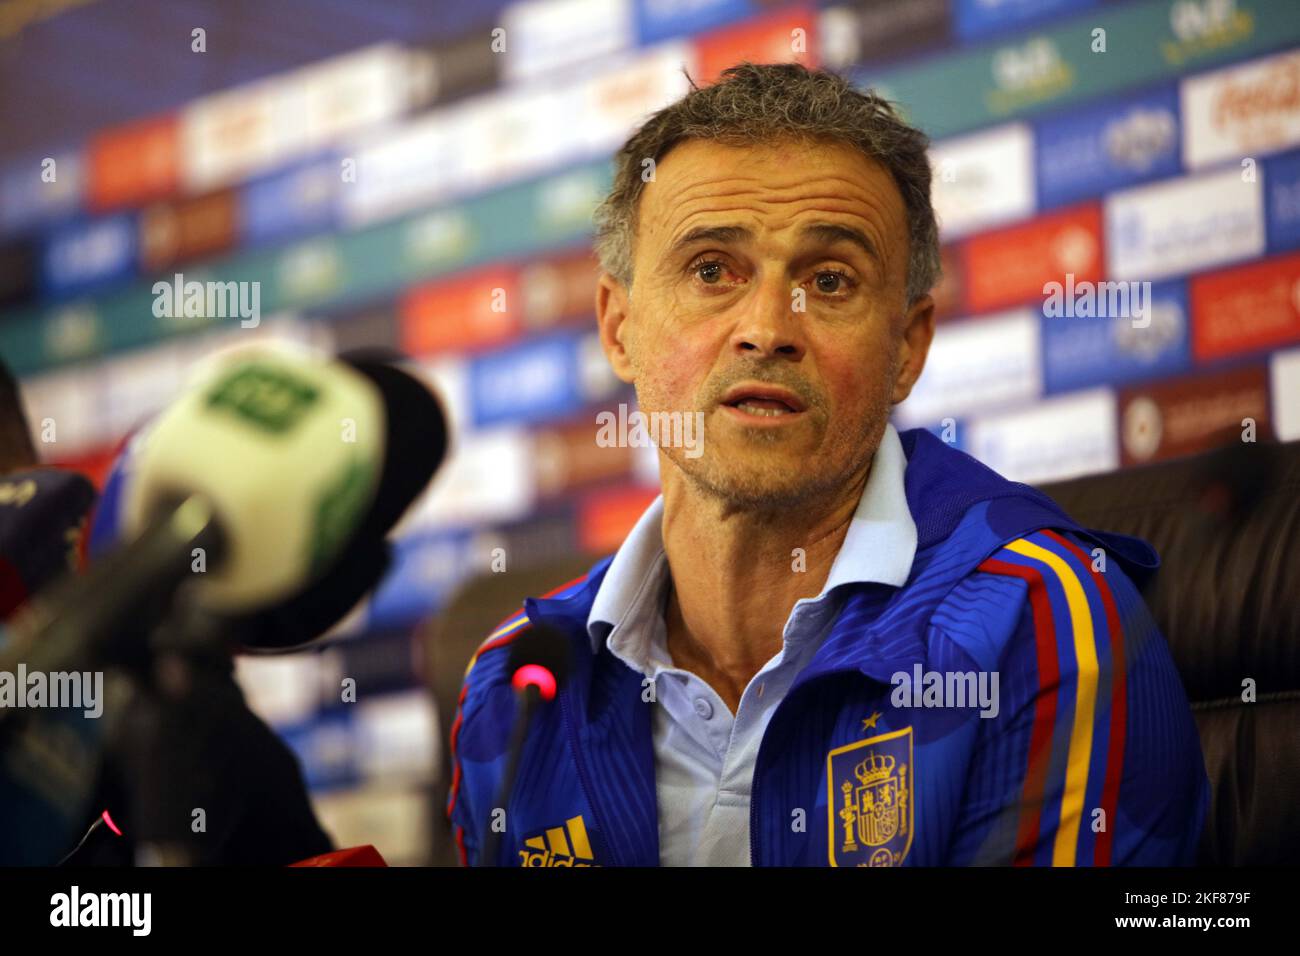 Amman, Jordan. 16th Nov, 2022. Spain's coach Luis Enrique attends a press conference in Amman, Jordan, Nov. 16, 2022. Spain will face Jordan in their international friendly match in Amman on Thursday, the squad's last match before they head to Qatar for the World Cup. Credit: Mohammad Abu Ghosh/Xinhua/Alamy Live News Stock Photo